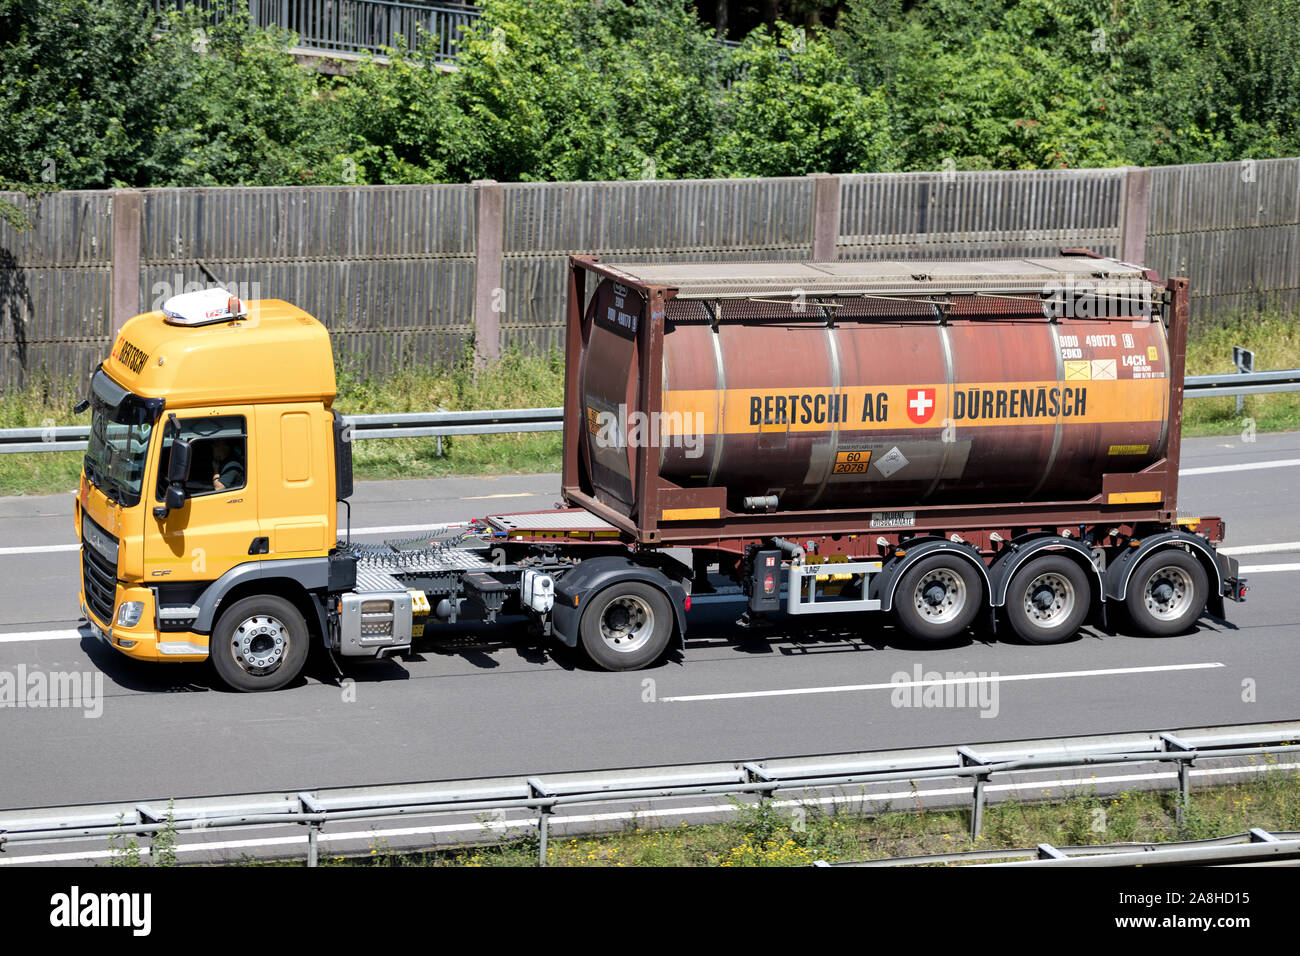 Bertschi truck on motorway. Bertschi AG is a Swiss transport company that provides logistics and transport for the chemical industry. Stock Photo